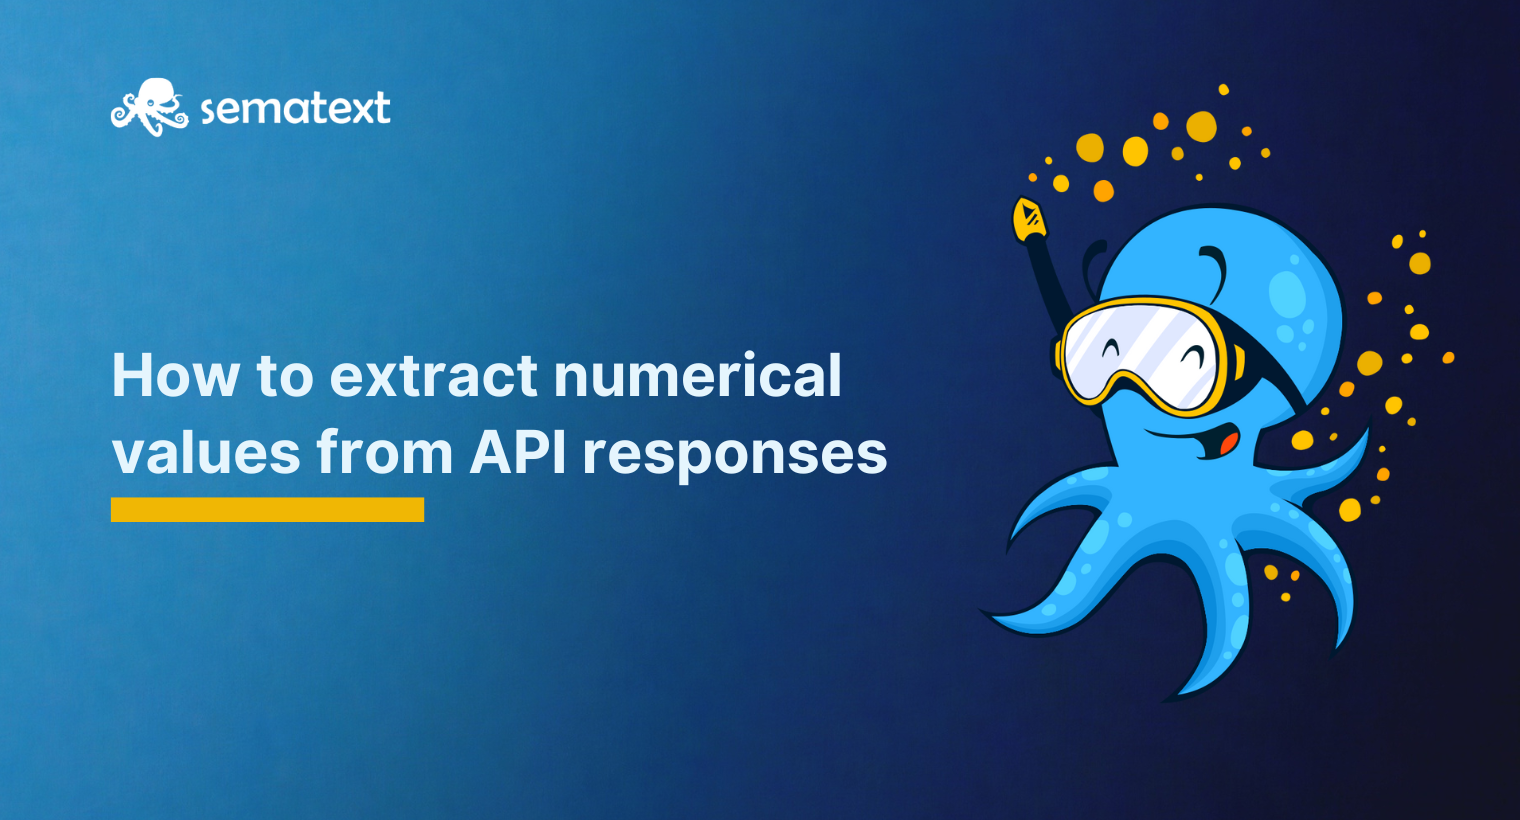 How to Extract Numerical Values from API Responses